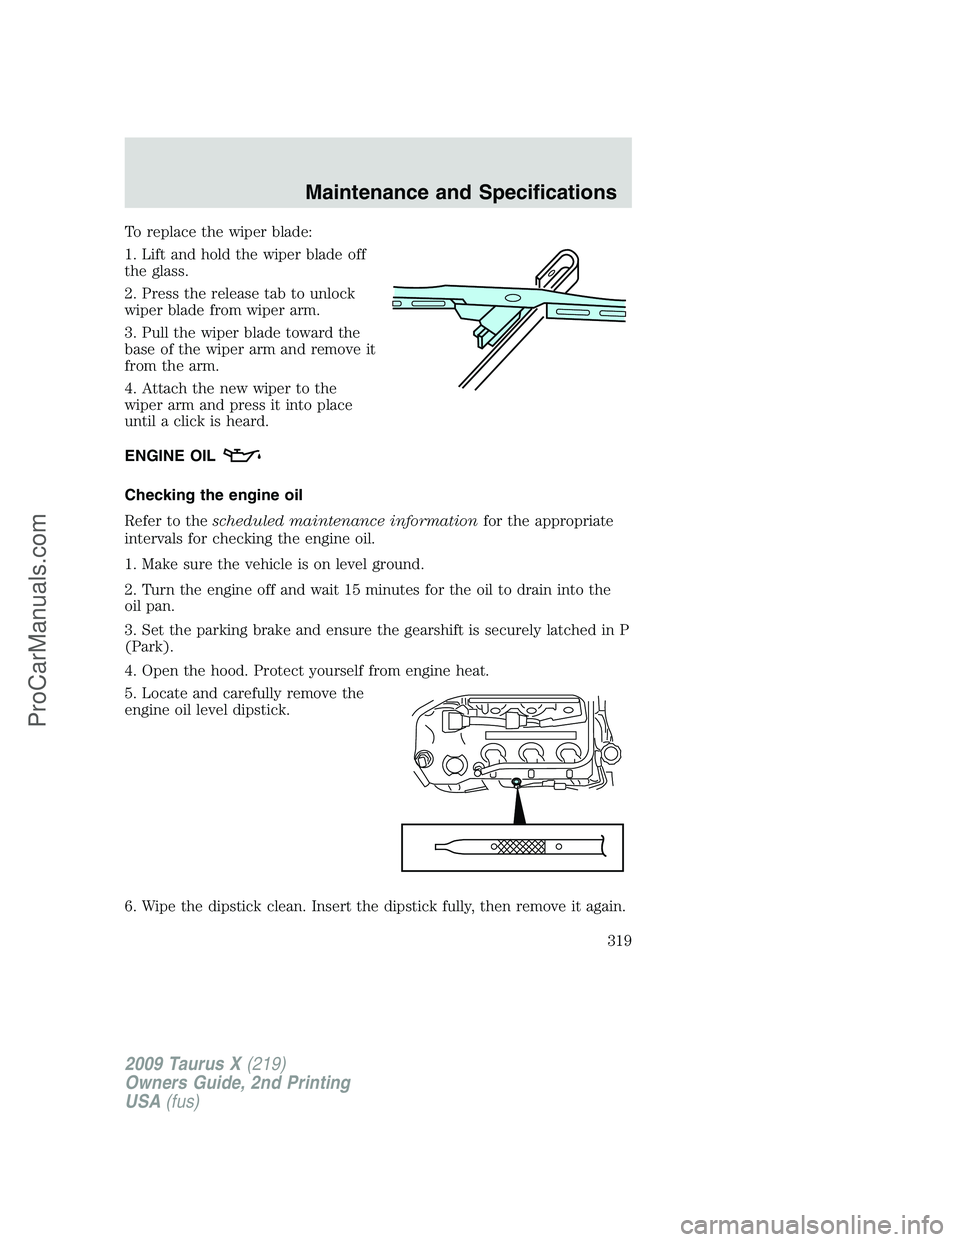 FORD FREESTYLE 2009  Owners Manual To replace the wiper blade:
1. Lift and hold the wiper blade off
the glass.
2. Press the release tab to unlock
wiper blade from wiper arm.
3. Pull the wiper blade toward the
base of the wiper arm and 